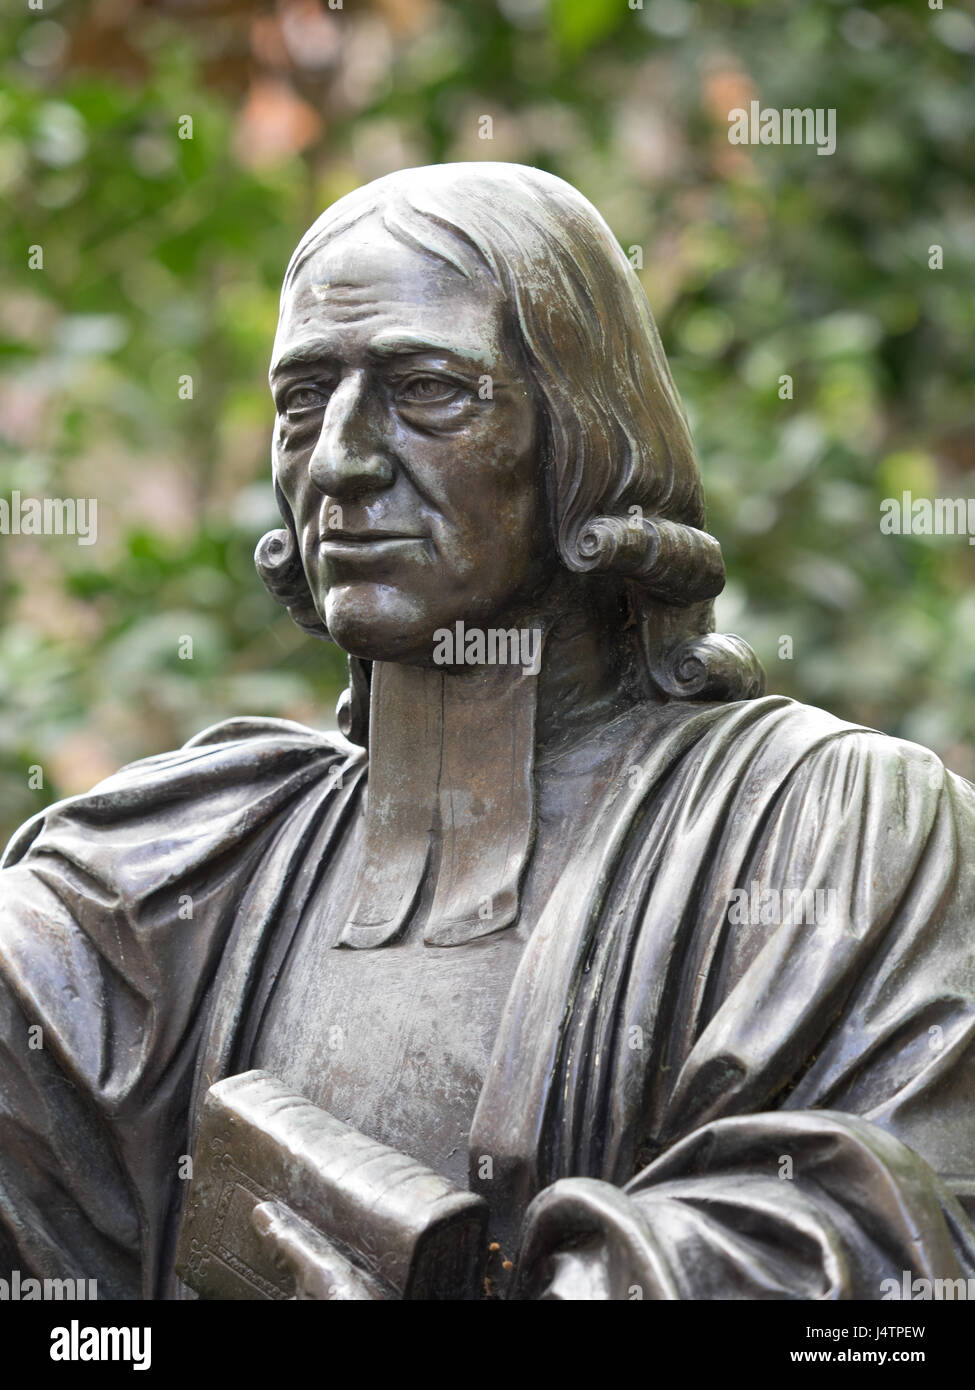 Statue of John Wesley, cleric and co-founder of Methodism, in St Paul's Cathedral Churchyard, London. cast from a sculpture created by Samuel Manning. Stock Photo